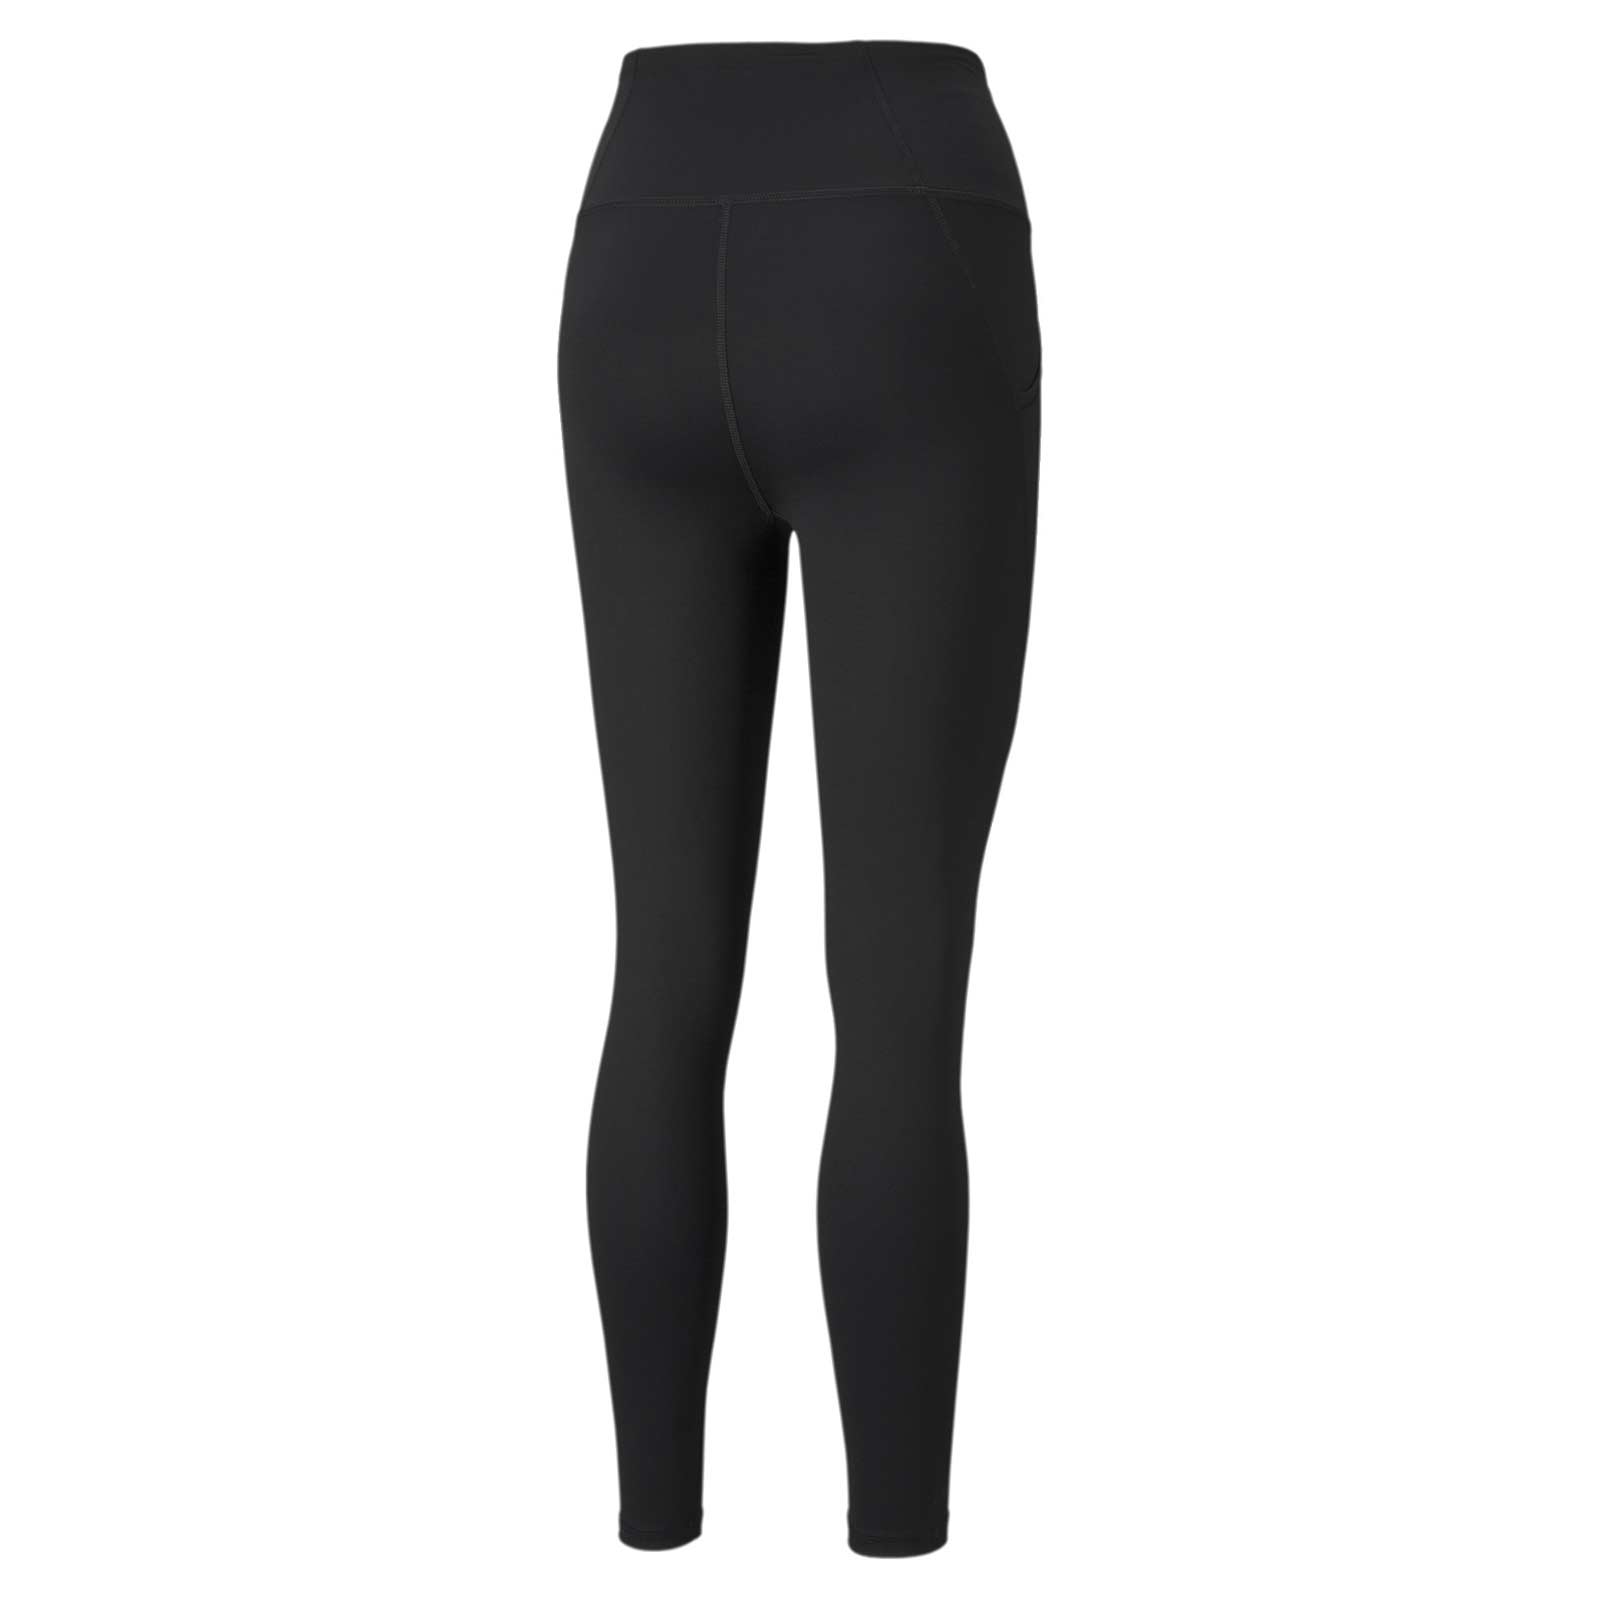 PUMA FAVOURITE FOREVER HIGH WAIST 7/8 TIGHTS